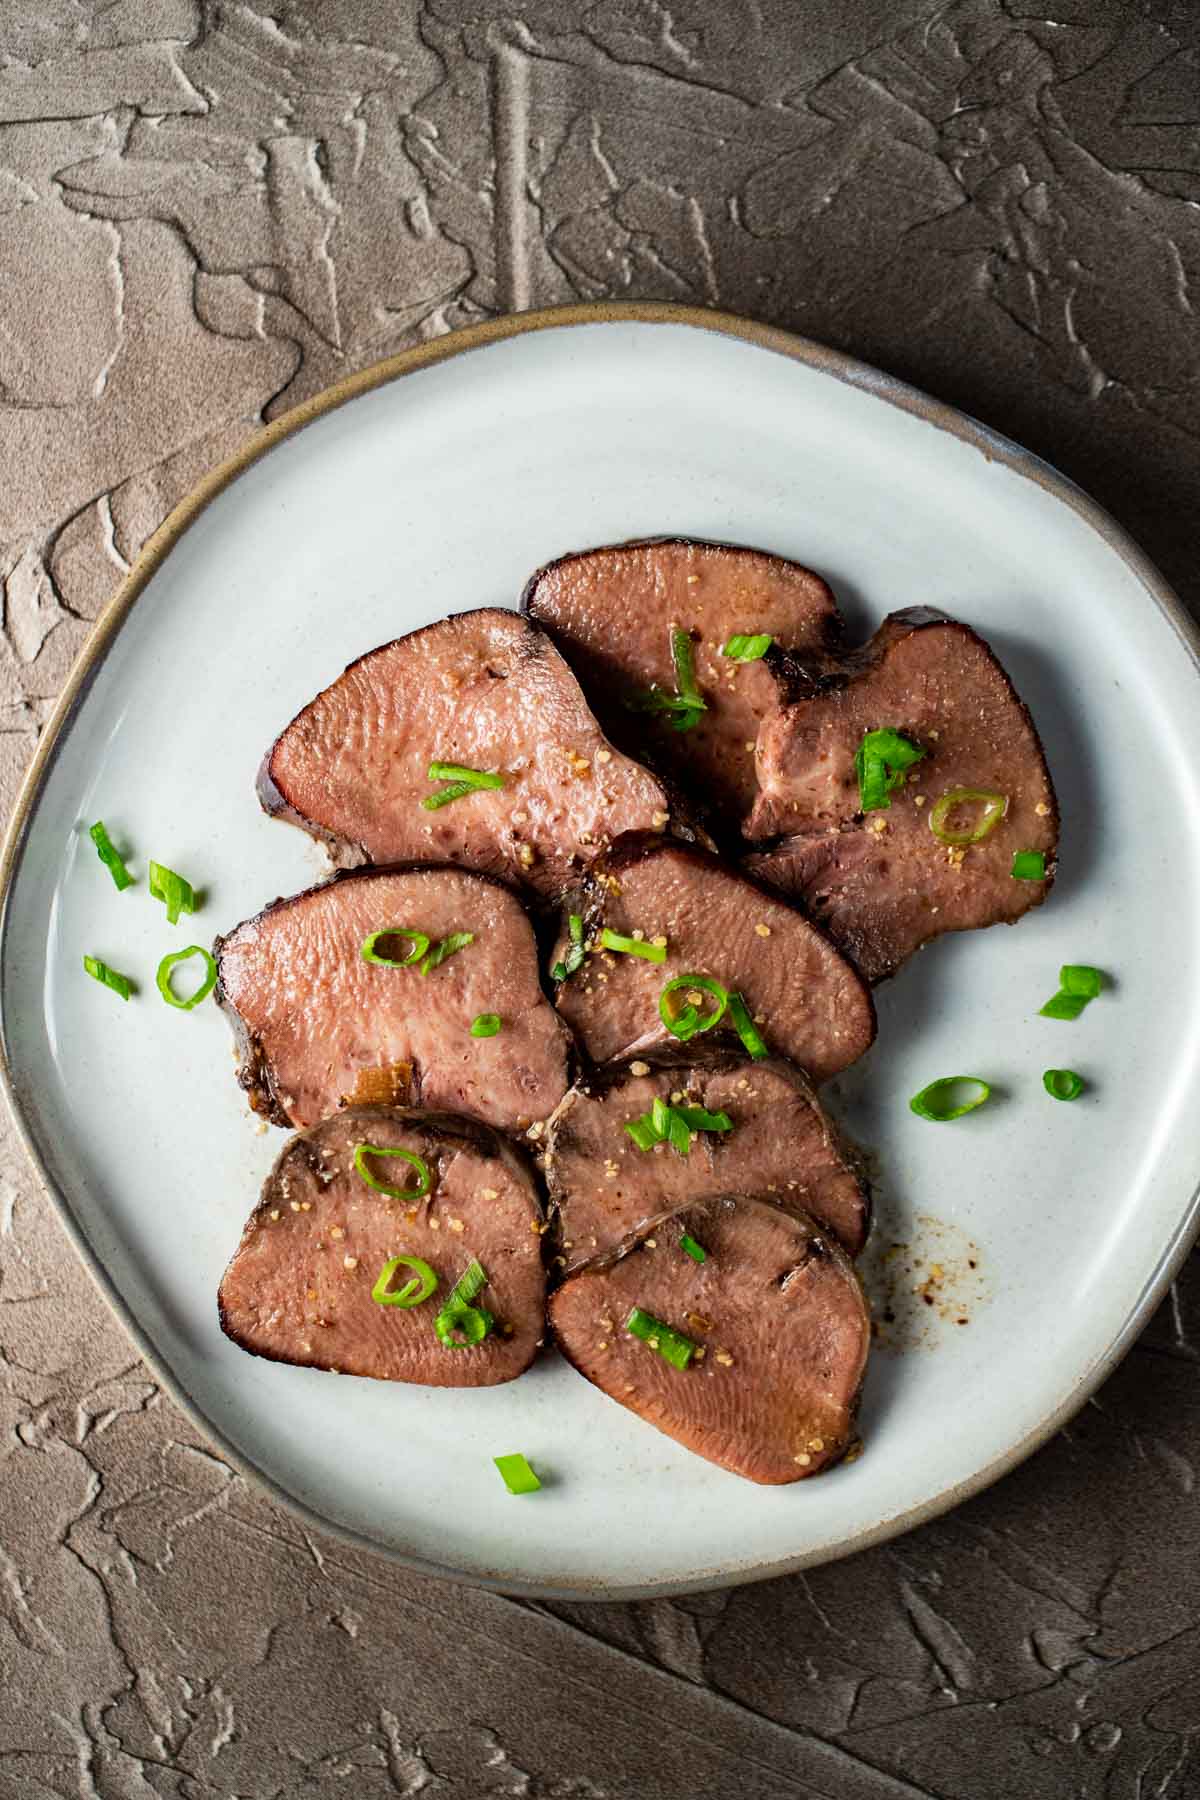 Slices of beef tongue arranged on a white plate.